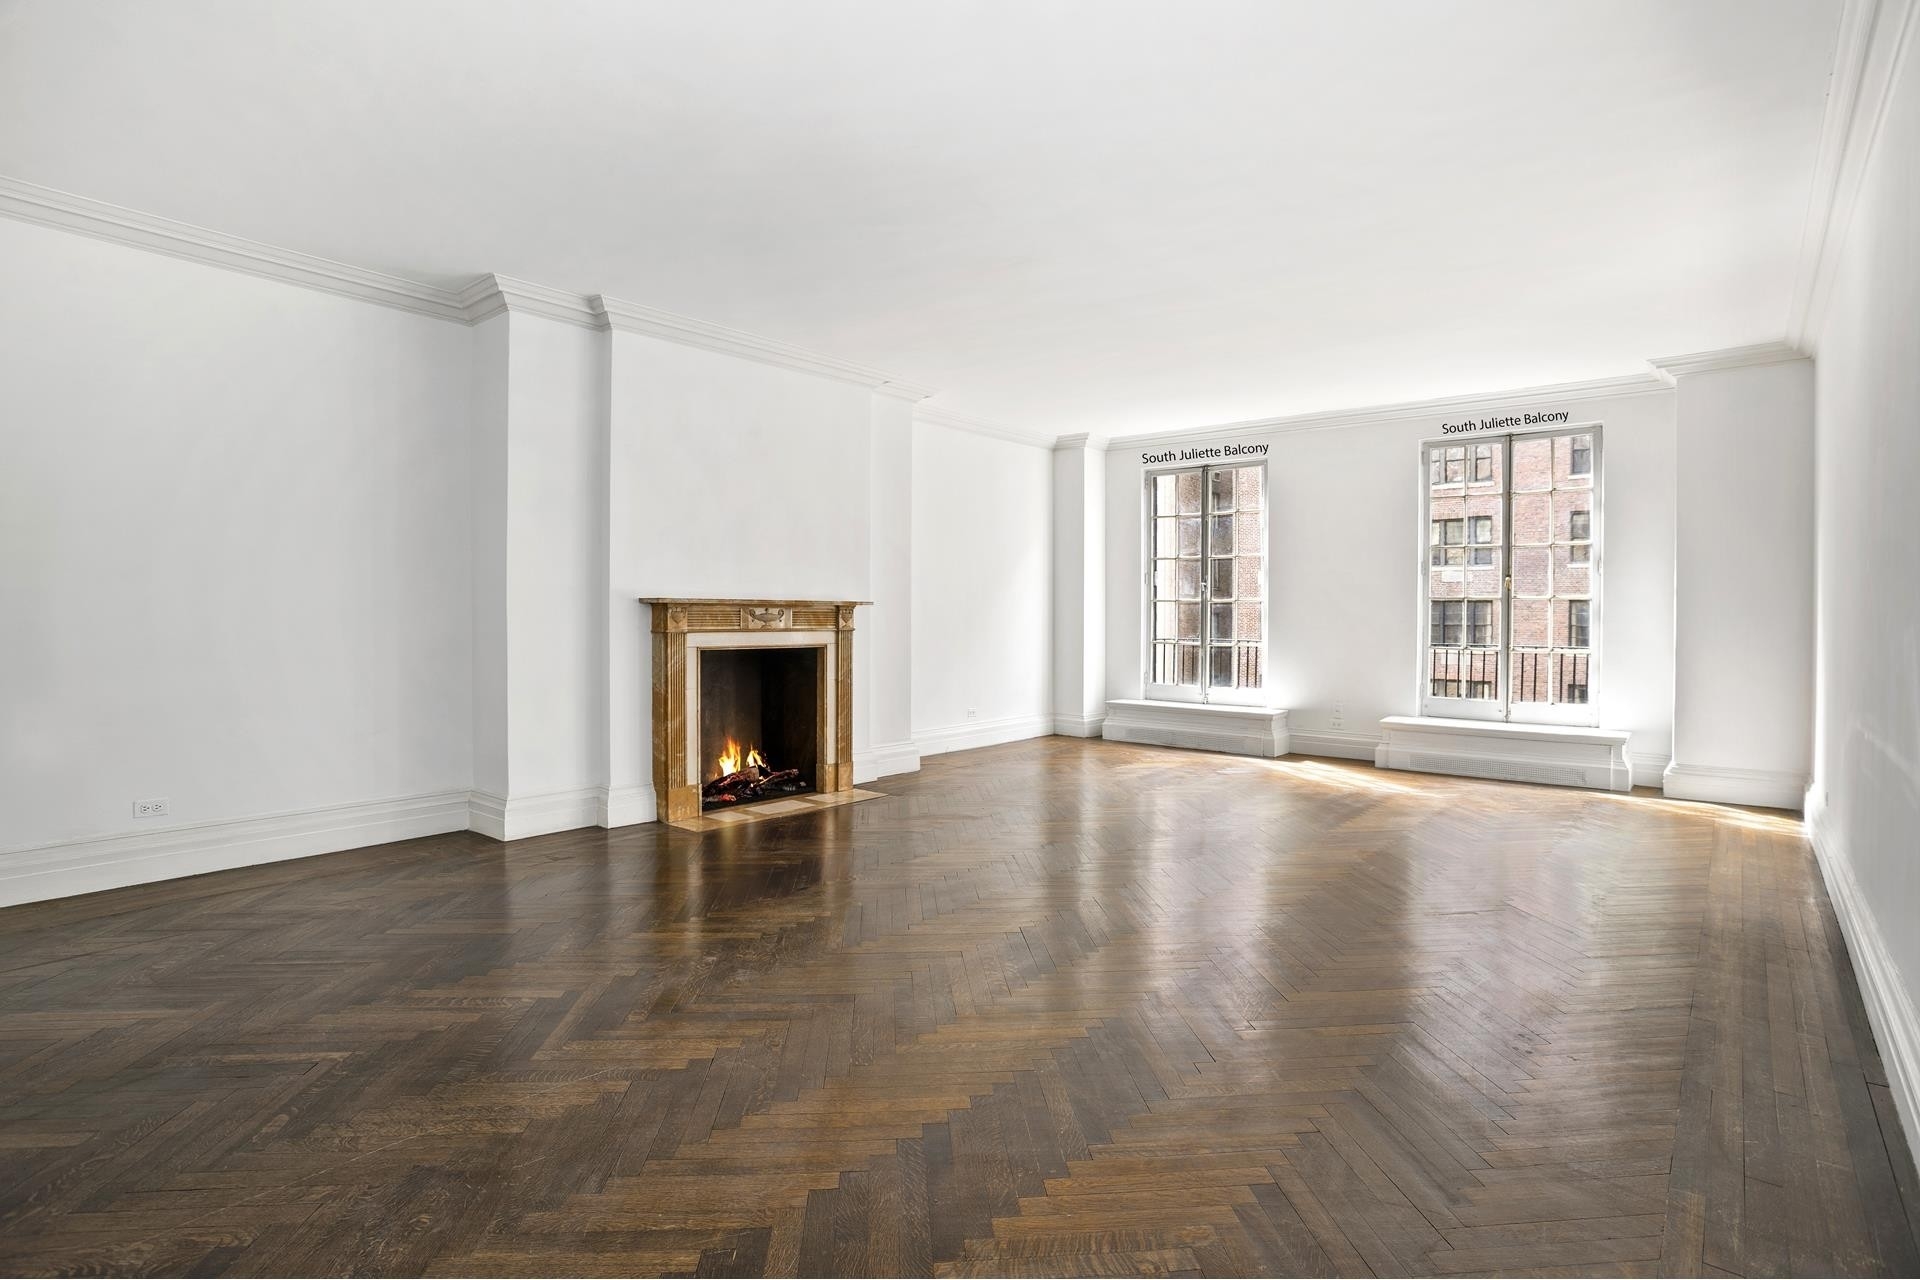 Co-op Properties for Sale at 447 E 57TH ST, 9TH Sutton Place, New York, NY 10022